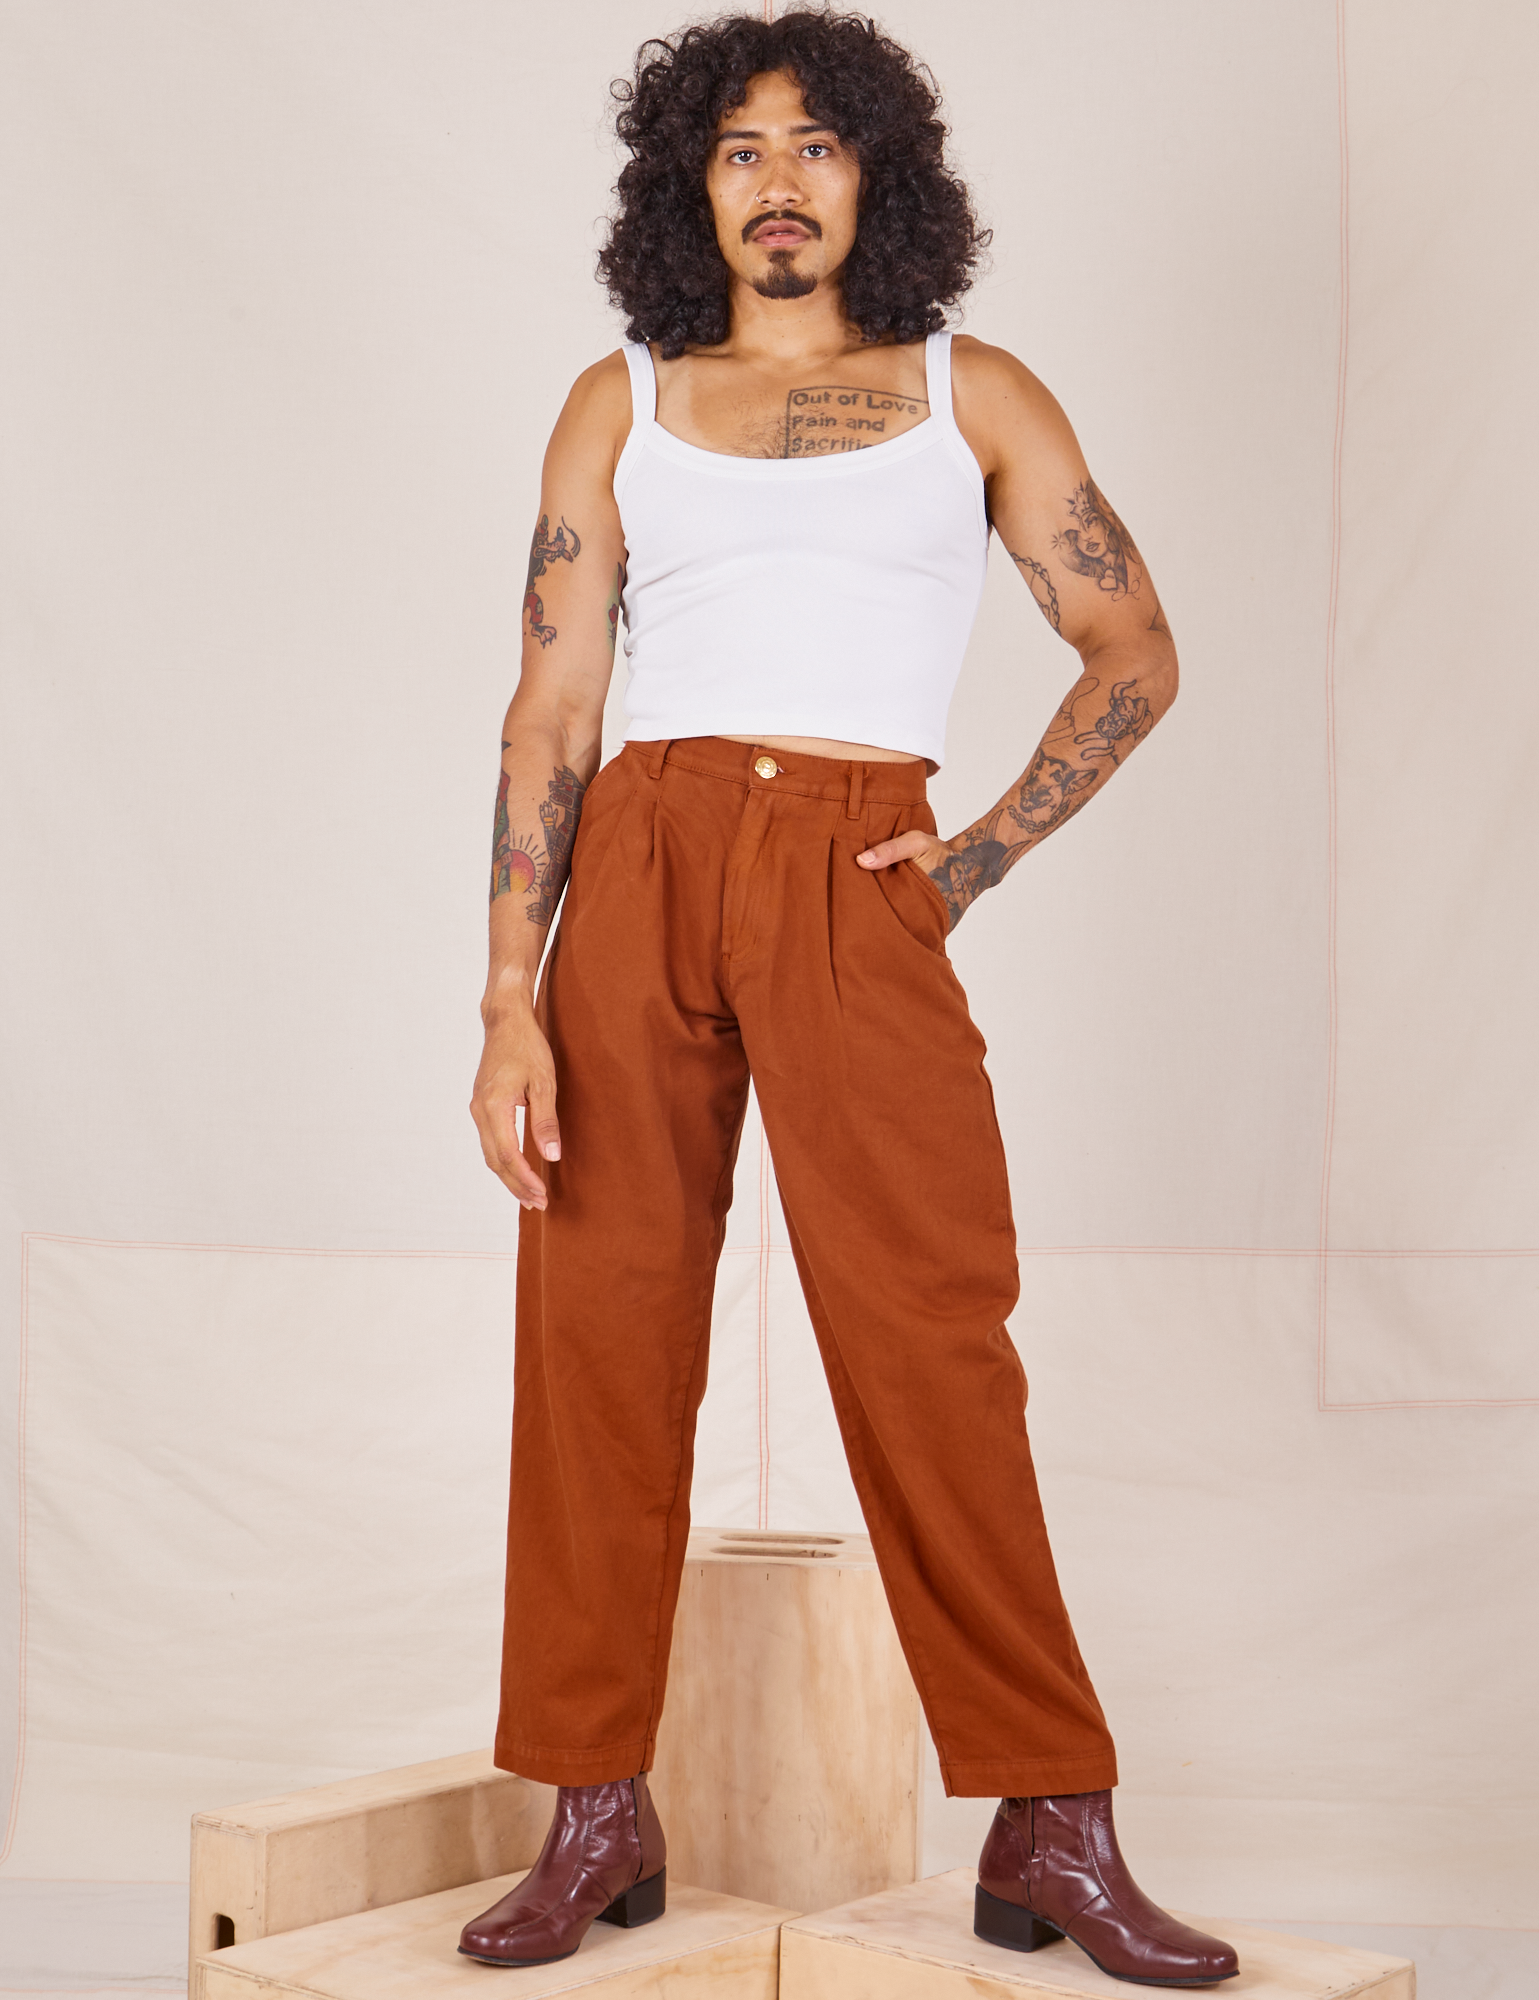 Jesse is 5'8" and wearing XXS Heavyweight Trousers in Burnt Terracotta paired with vintage off-white Cropped Cami